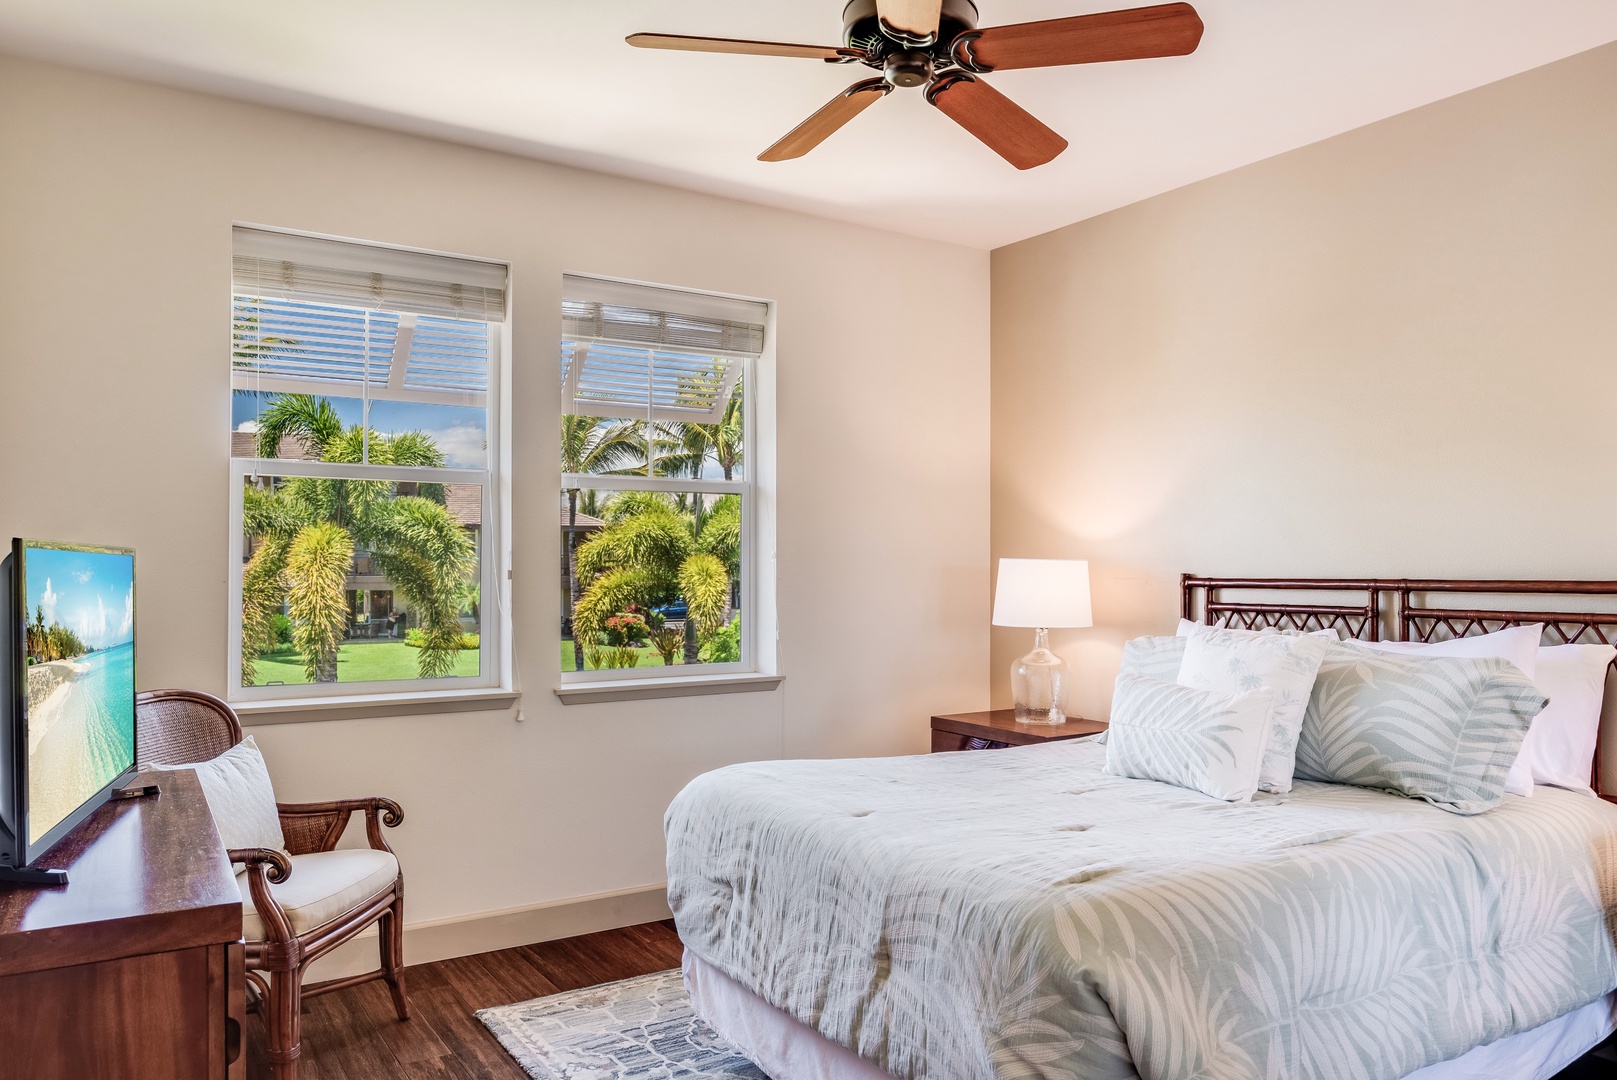 Waikoloa Vacation Rentals, 3BD Hali'i Kai (12G) at Waikoloa Resort - Downstairs guest bedroom 3 w/ queen size bed & flat-screen TV